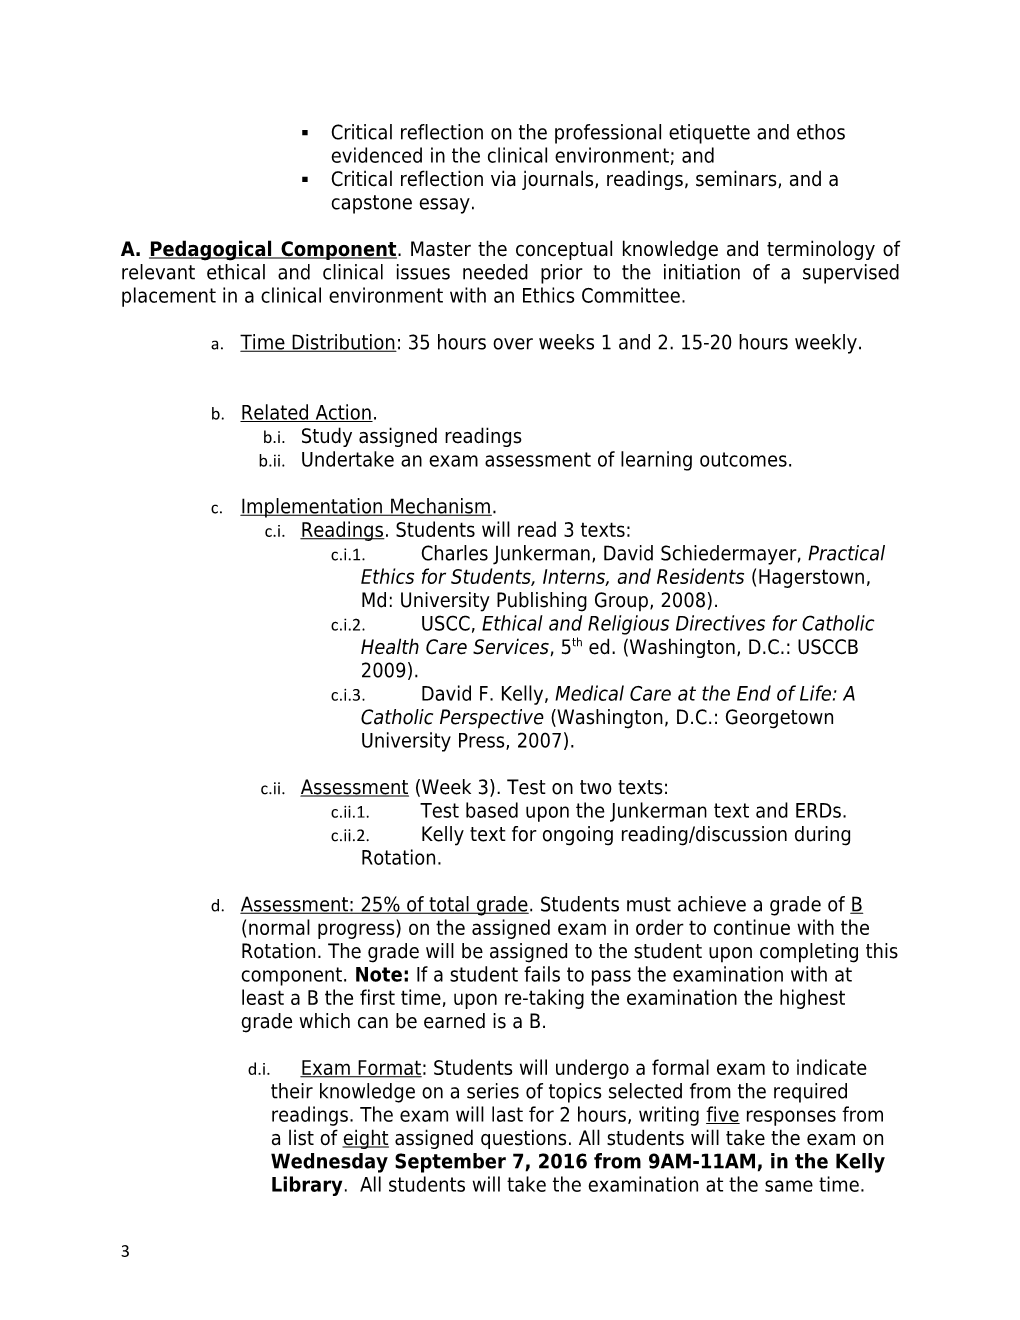 Revised (6/17/09) Syllabus, HCE646-91, Clinical Healthcare Ethics